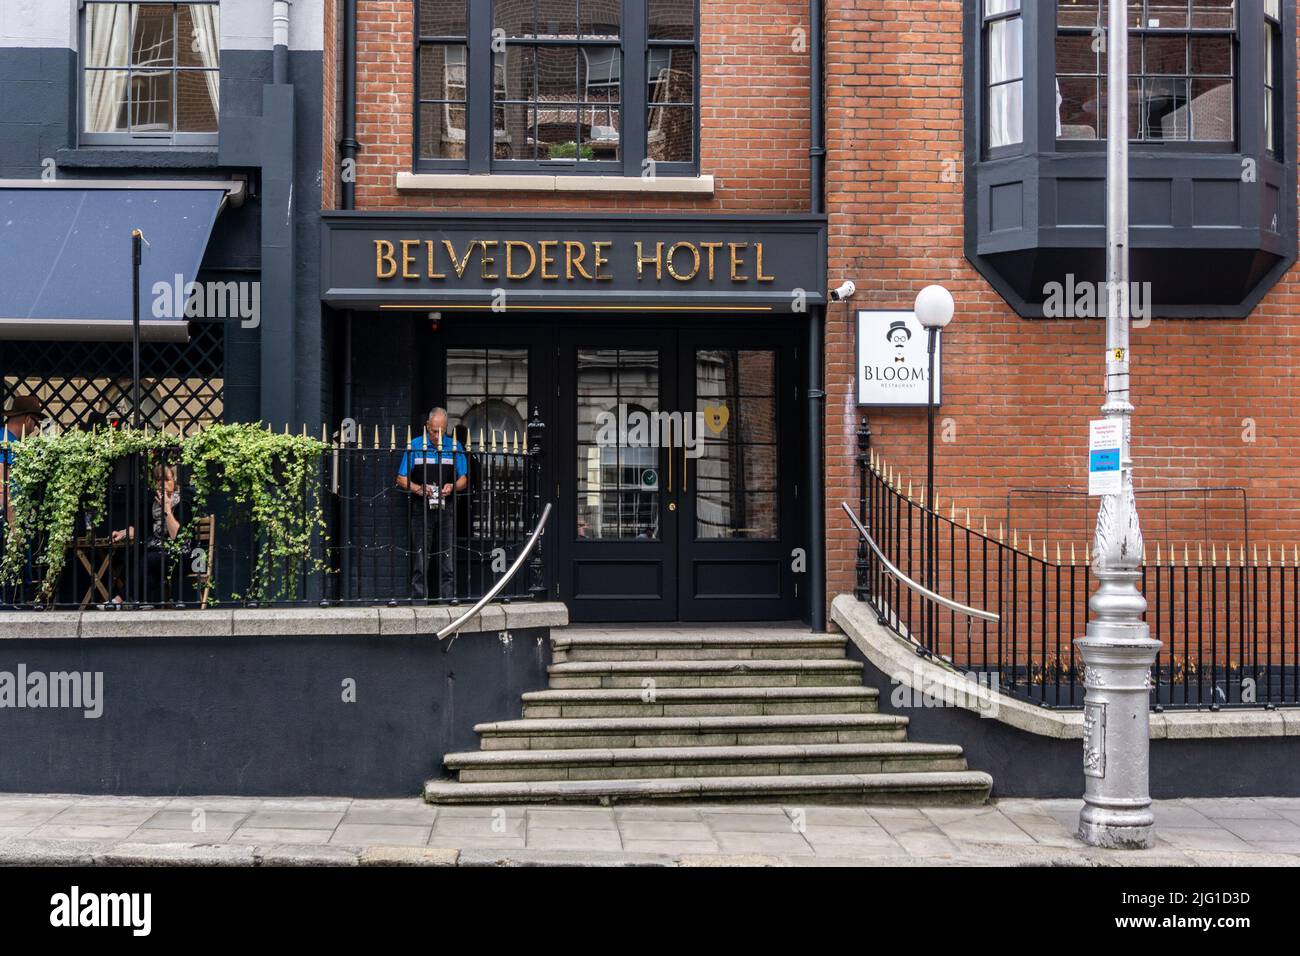 The Belvedere Hotel near Parnell Square, Dublin, Ireland. A 3 star, 103 roomed hotel in the city centre. Stock Photo